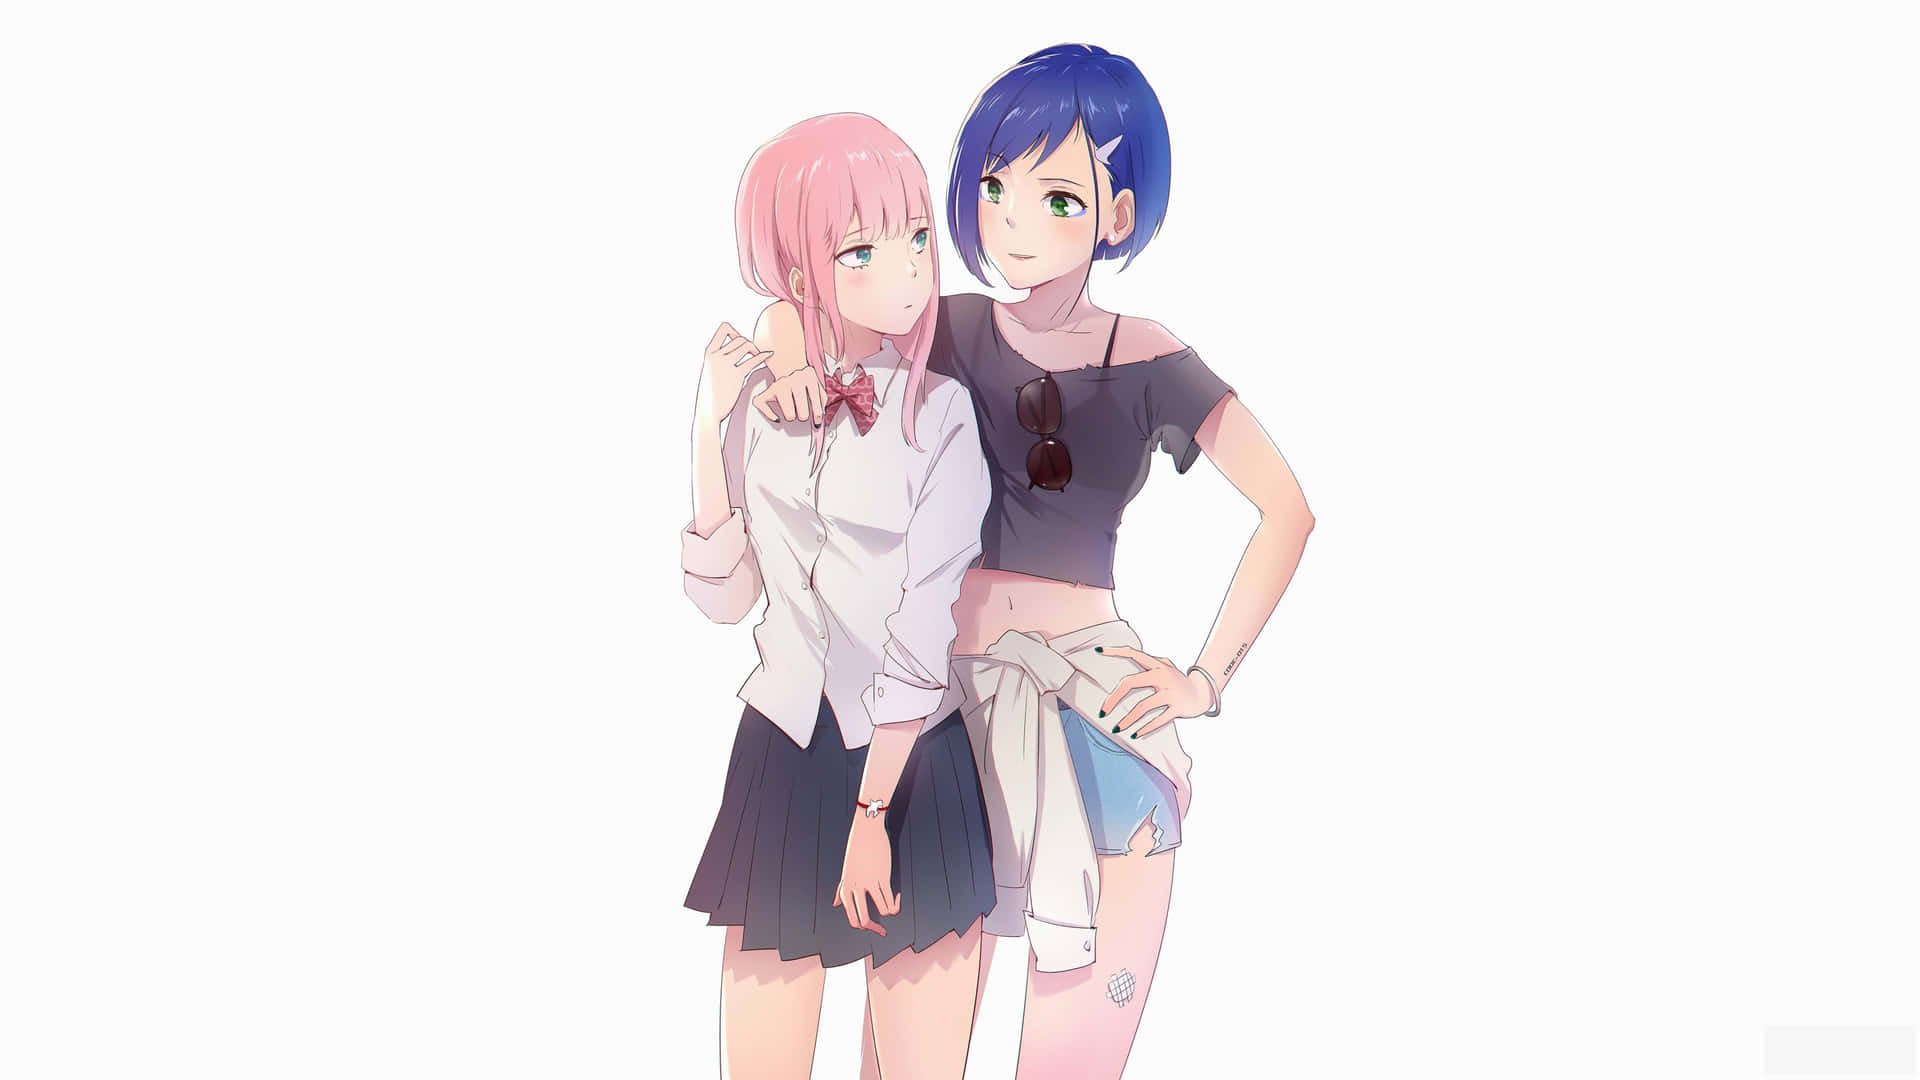 Hiro and Zero Two share a passionate embrace.